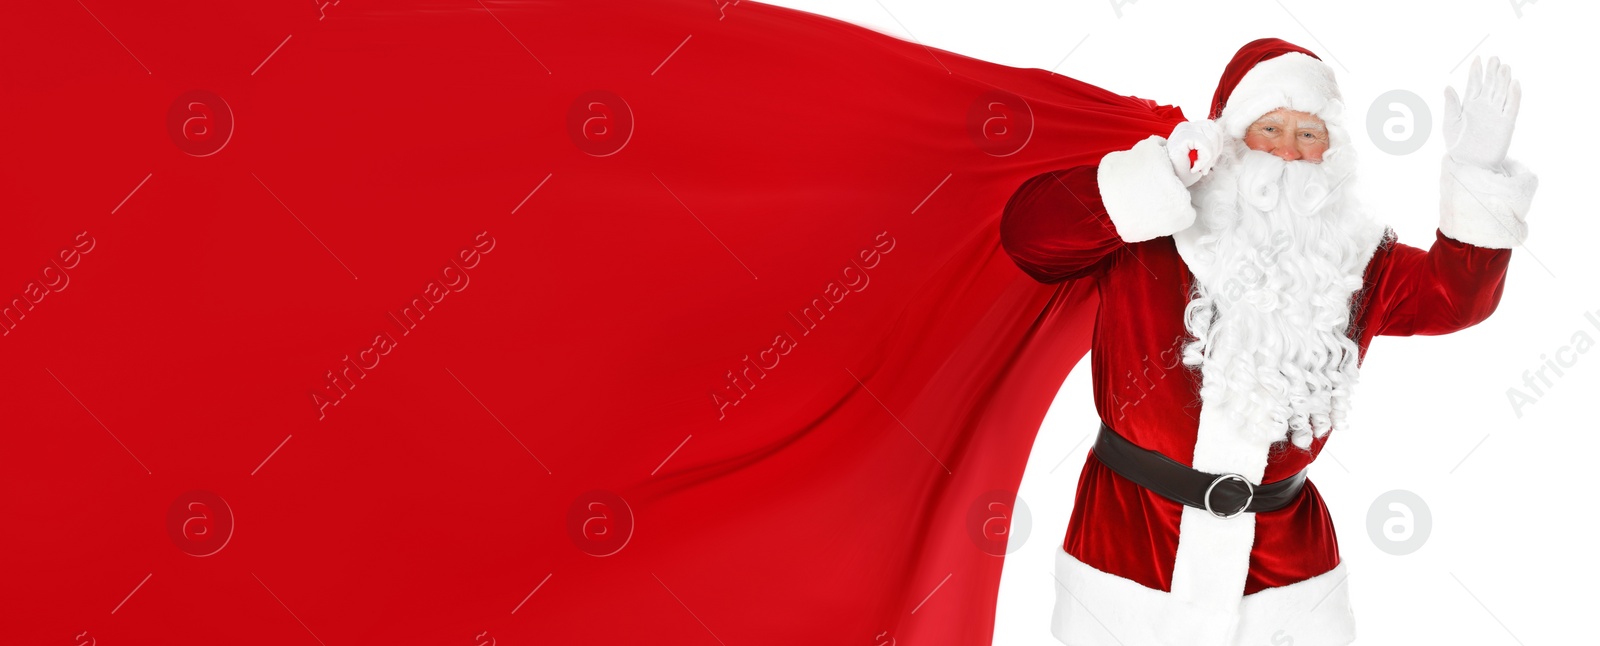 Image of Santa Claus with big red bag full of Christmas presents on white background, banner design